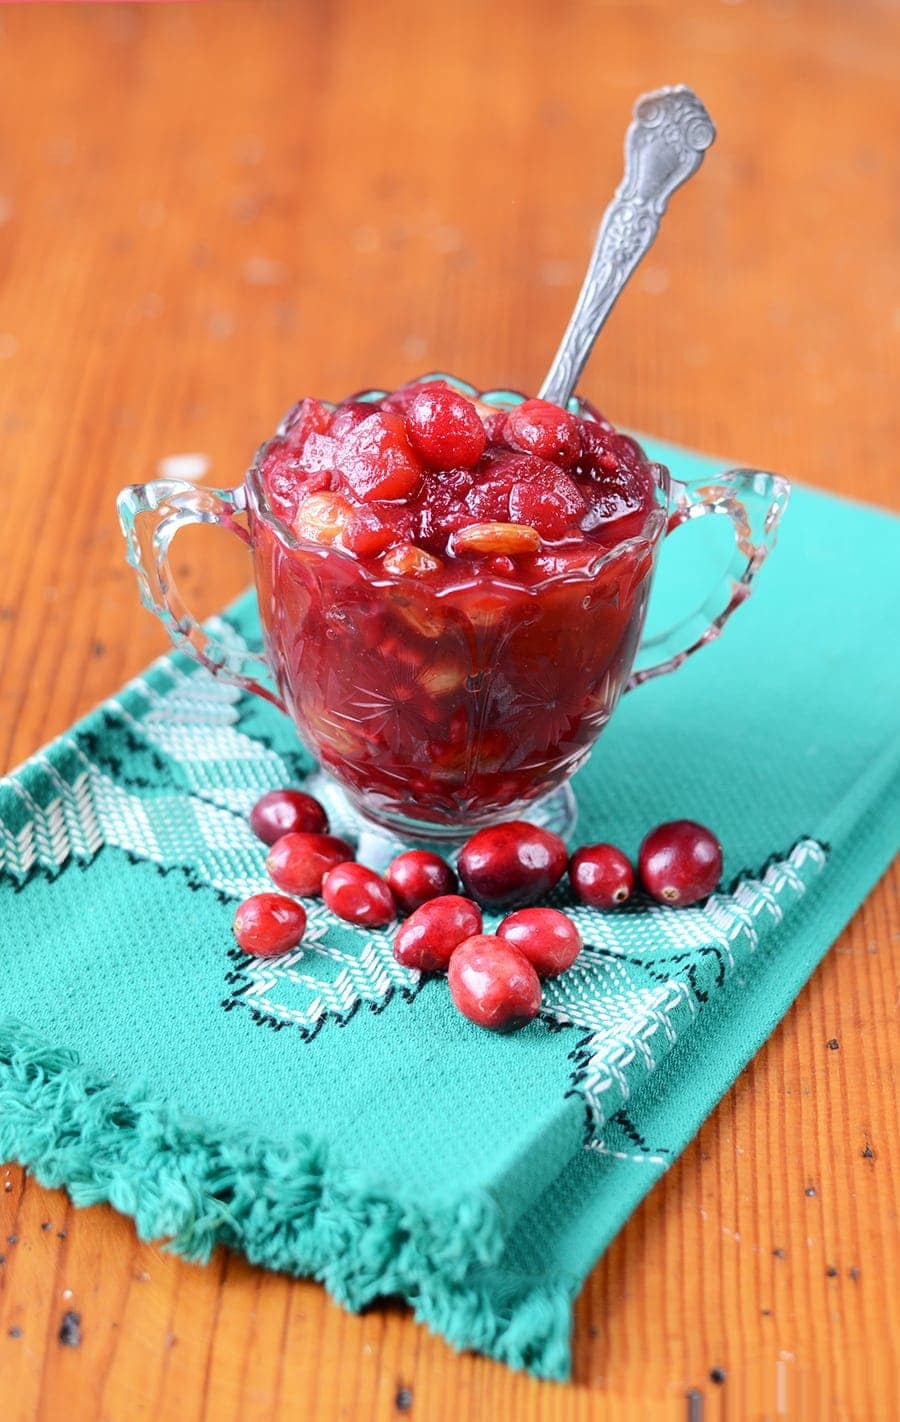 Cranberry Chutney Web - Cranberry Chutney with Apples, Raisins and Indian Spices